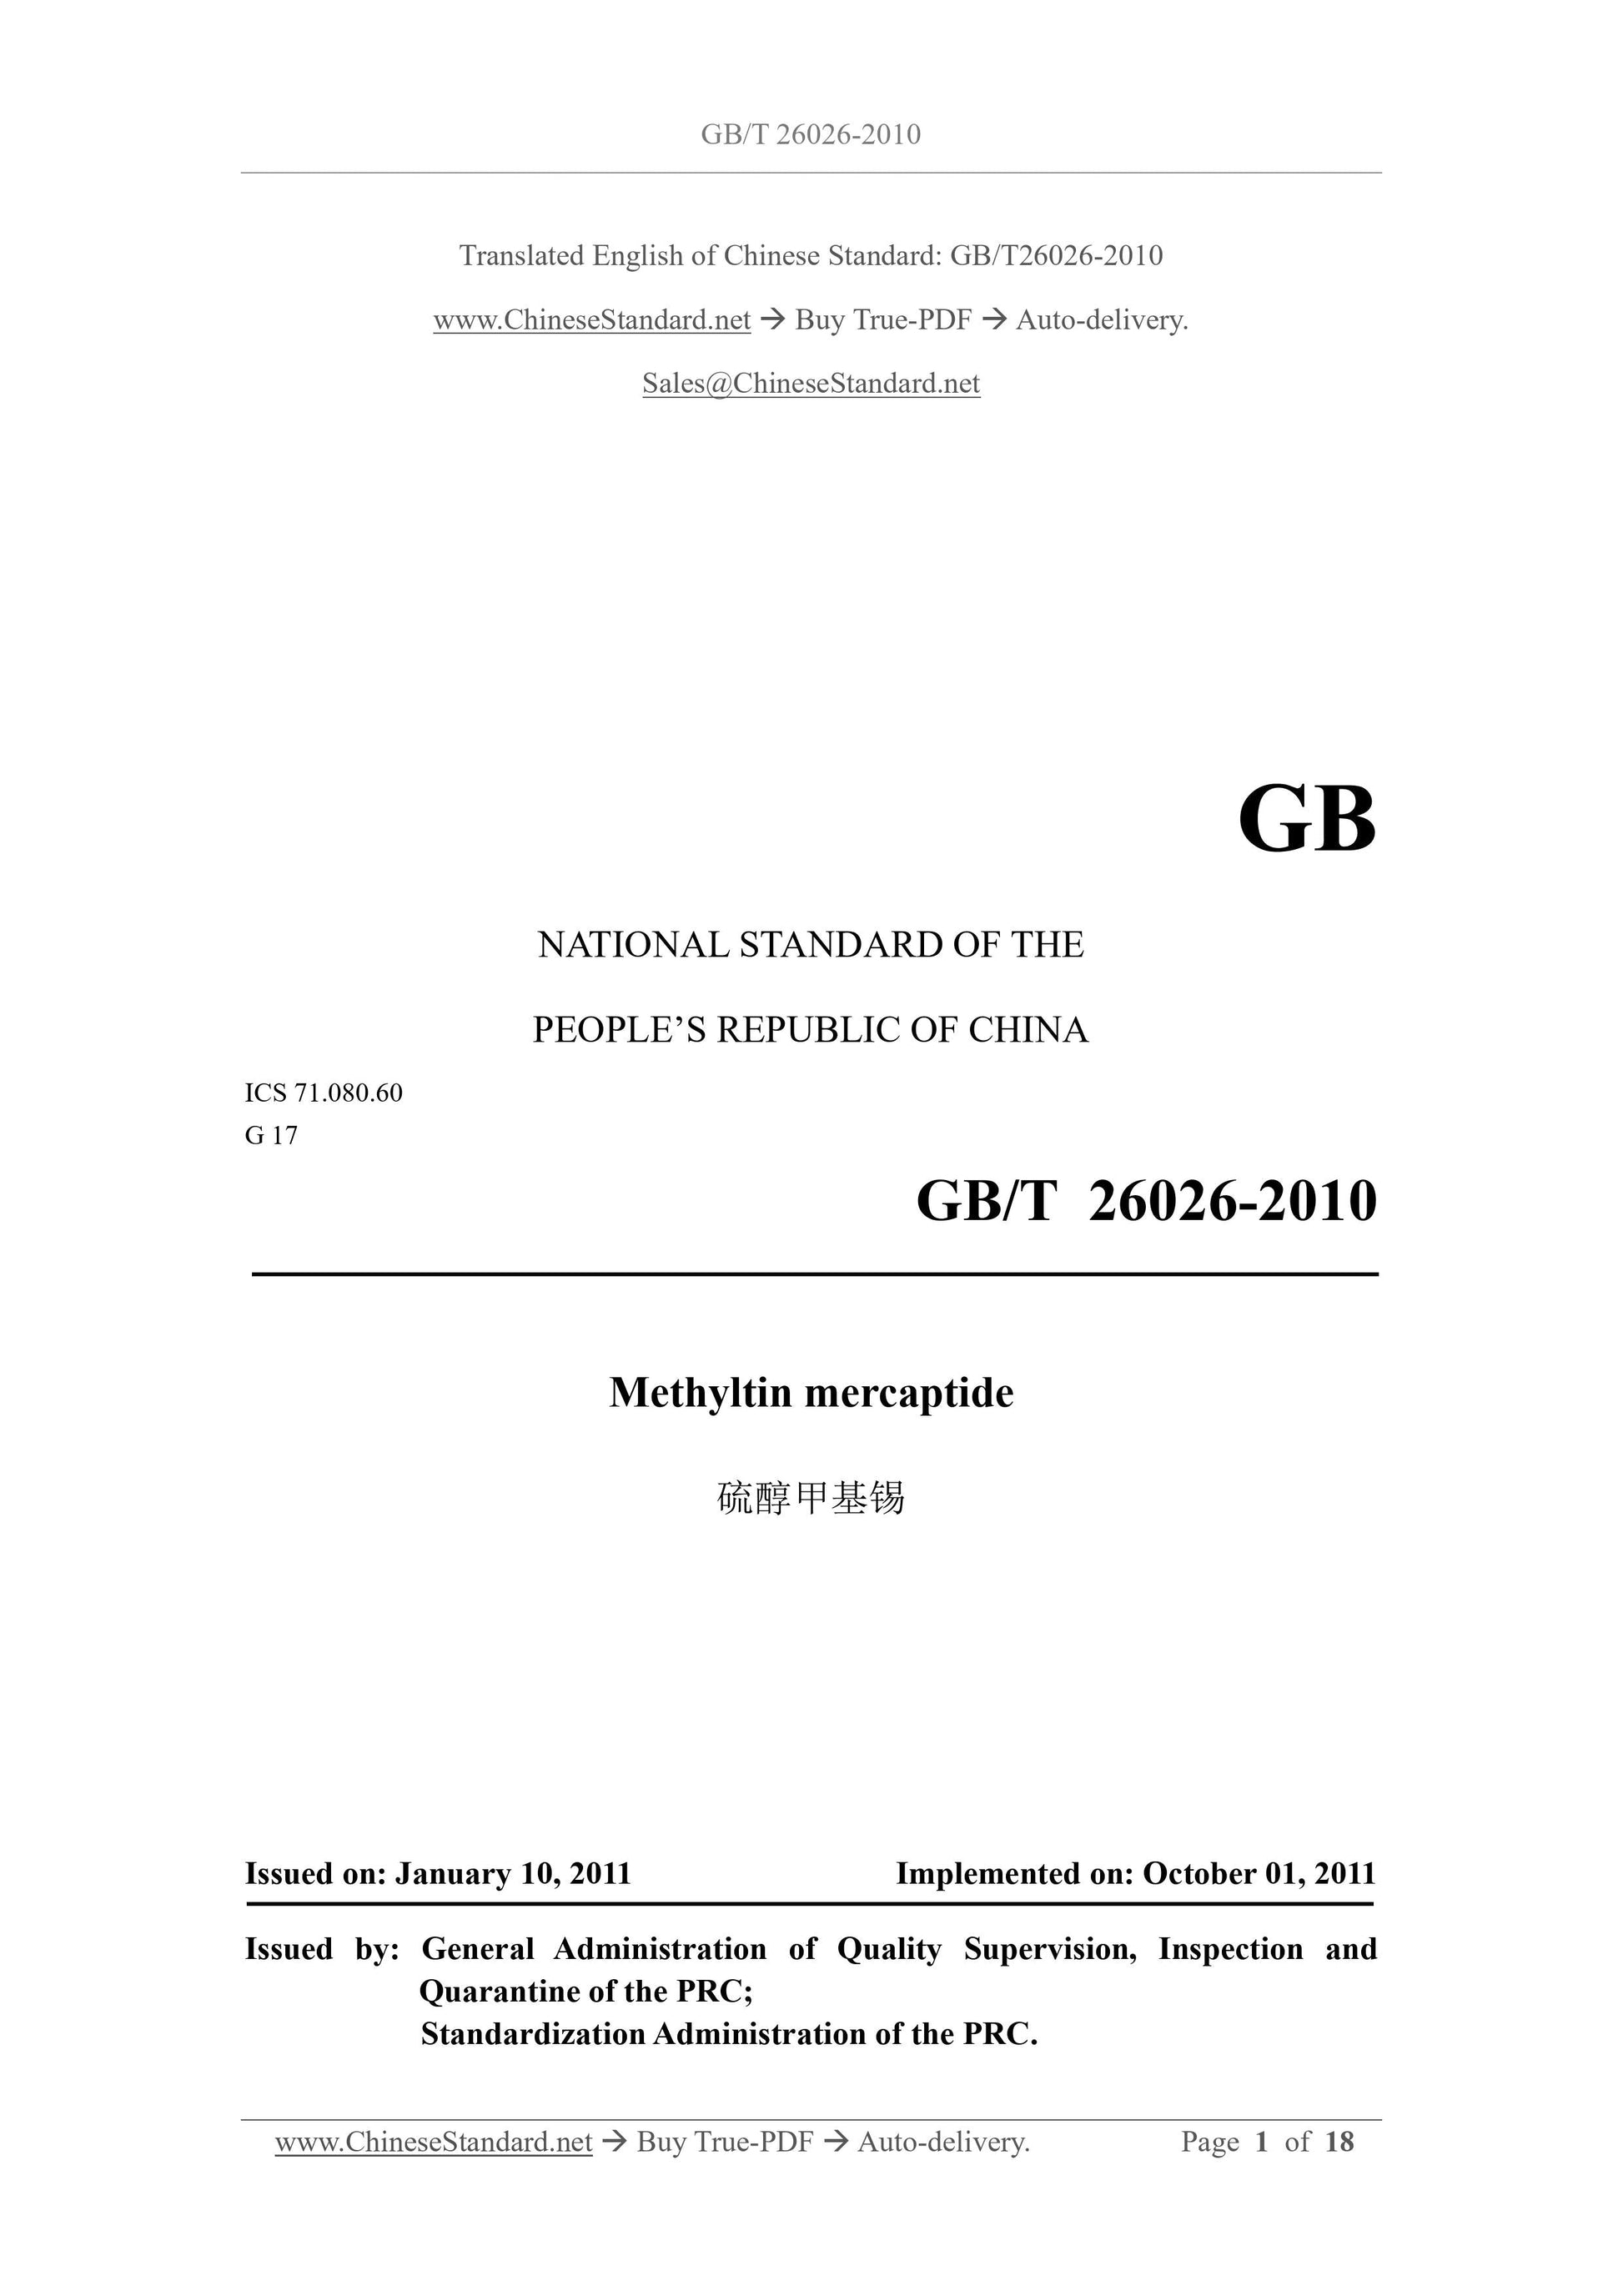 GB/T 26026-2010 Page 1